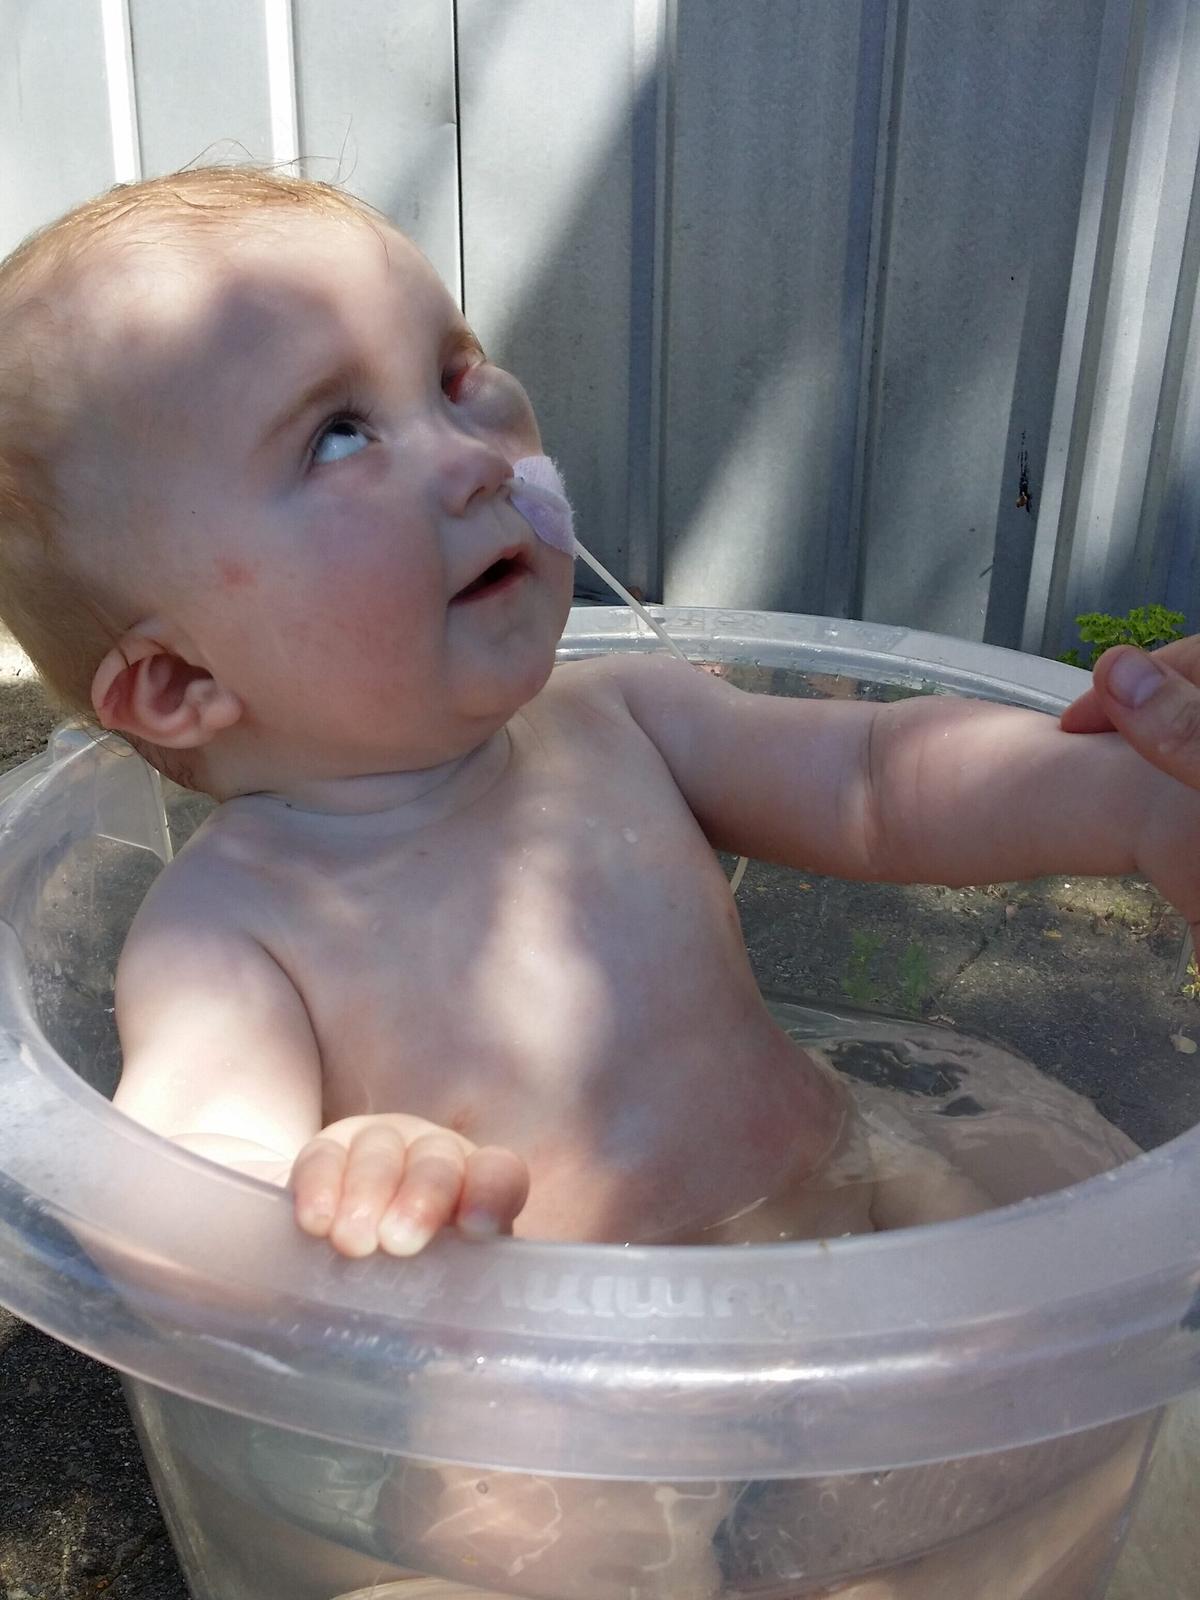 Eva having a much-needed cool bath after a hot day in February 2015. (Photo courtesy of <a href="http://theoneinamillionbaby.com/">Tessa Prebble</a>)